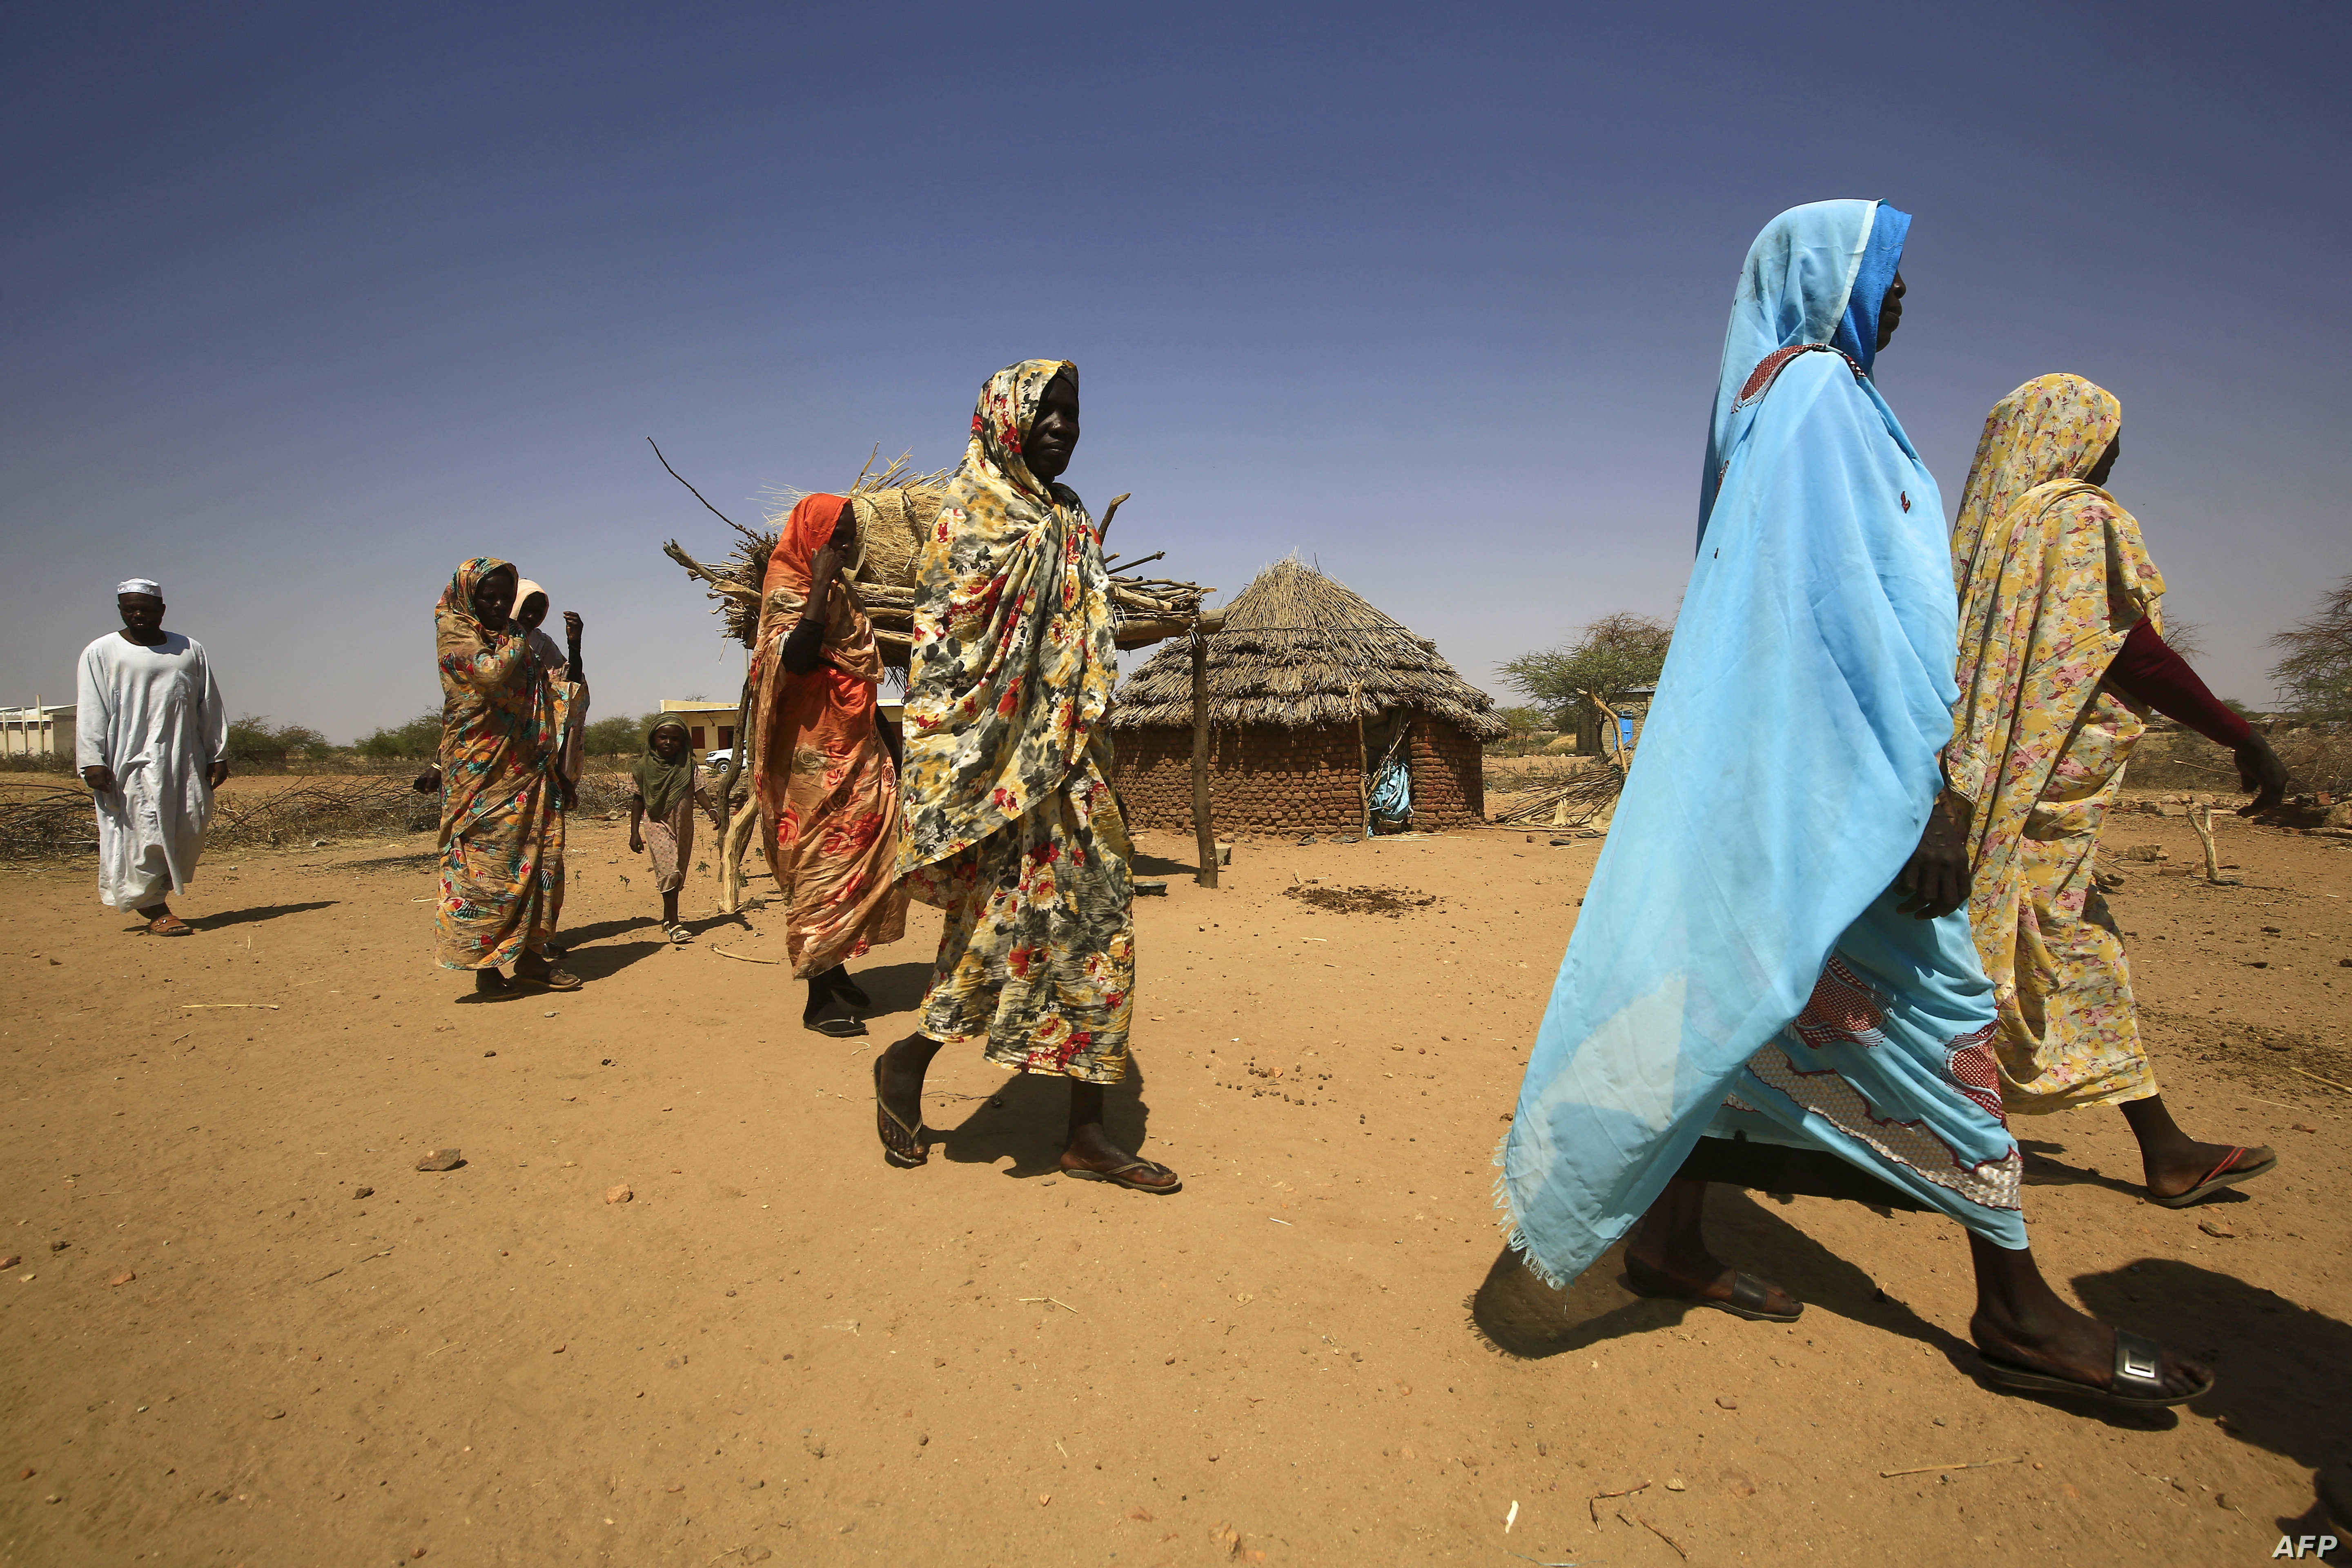 Sudan: Report monitoring the growing abduction and sexual exploitation of women into Darfur